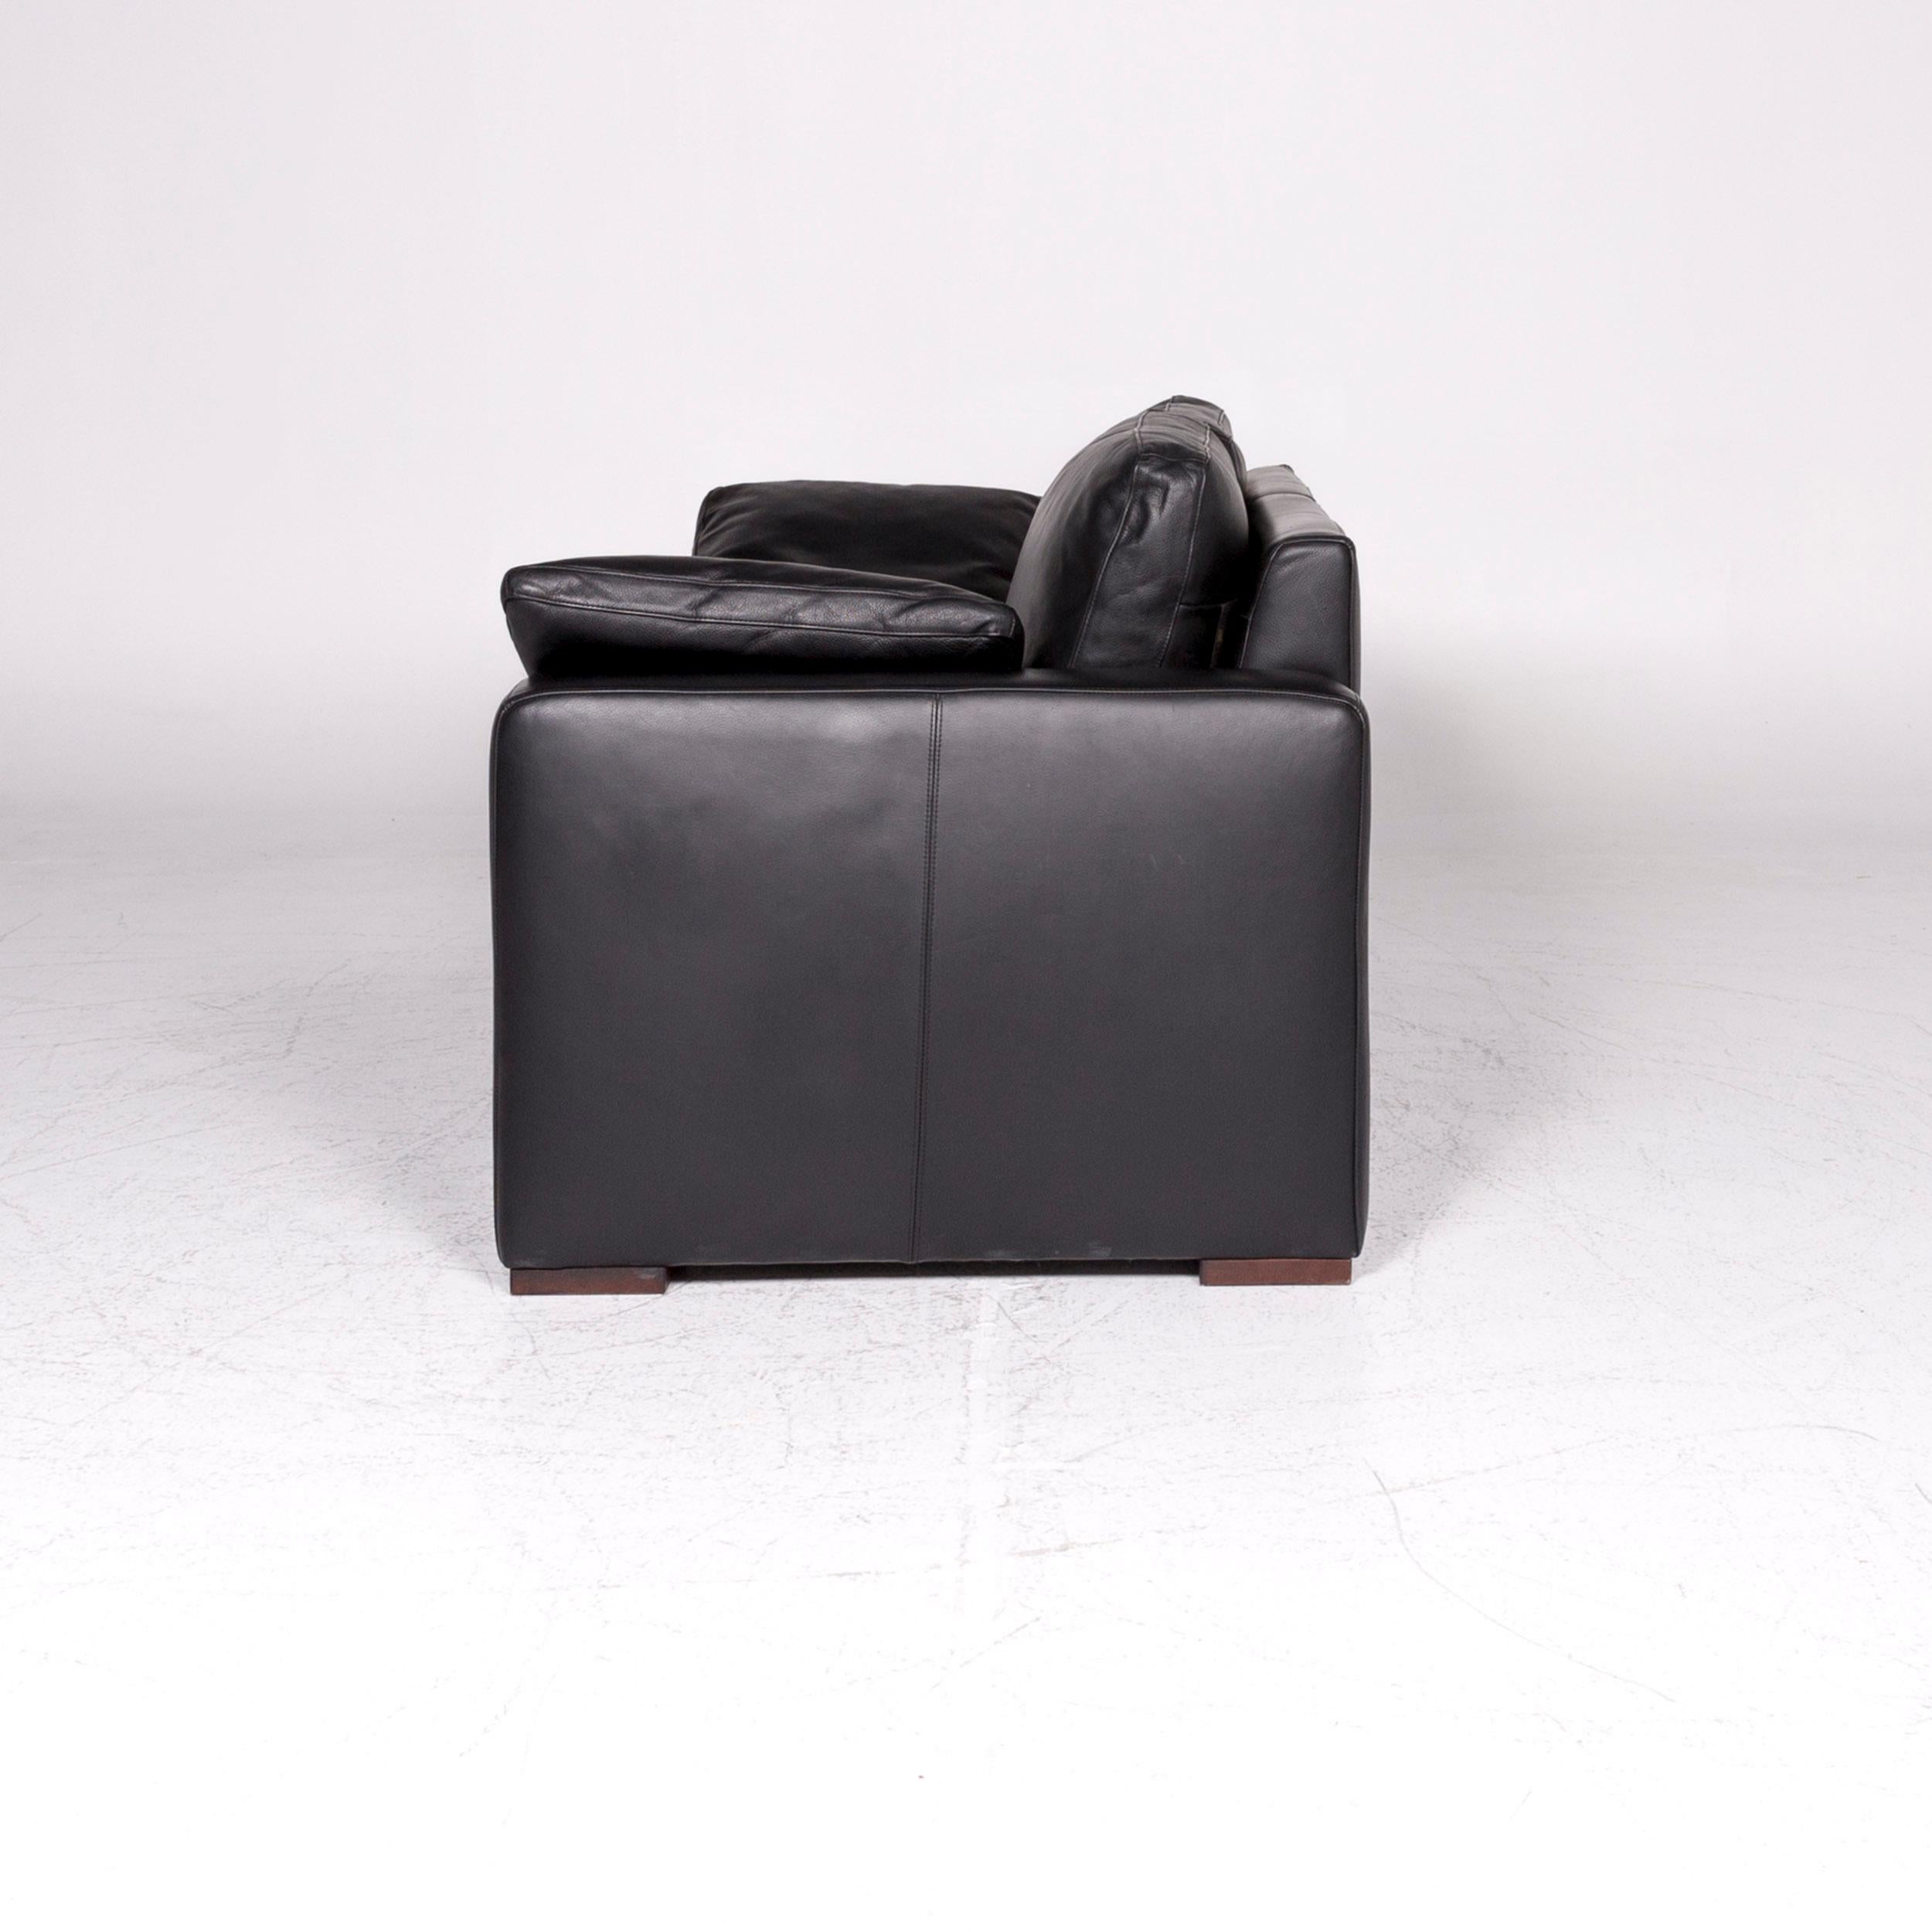 Machalke Designer Leather Sofa Black Two-Seat Couch For Sale 4